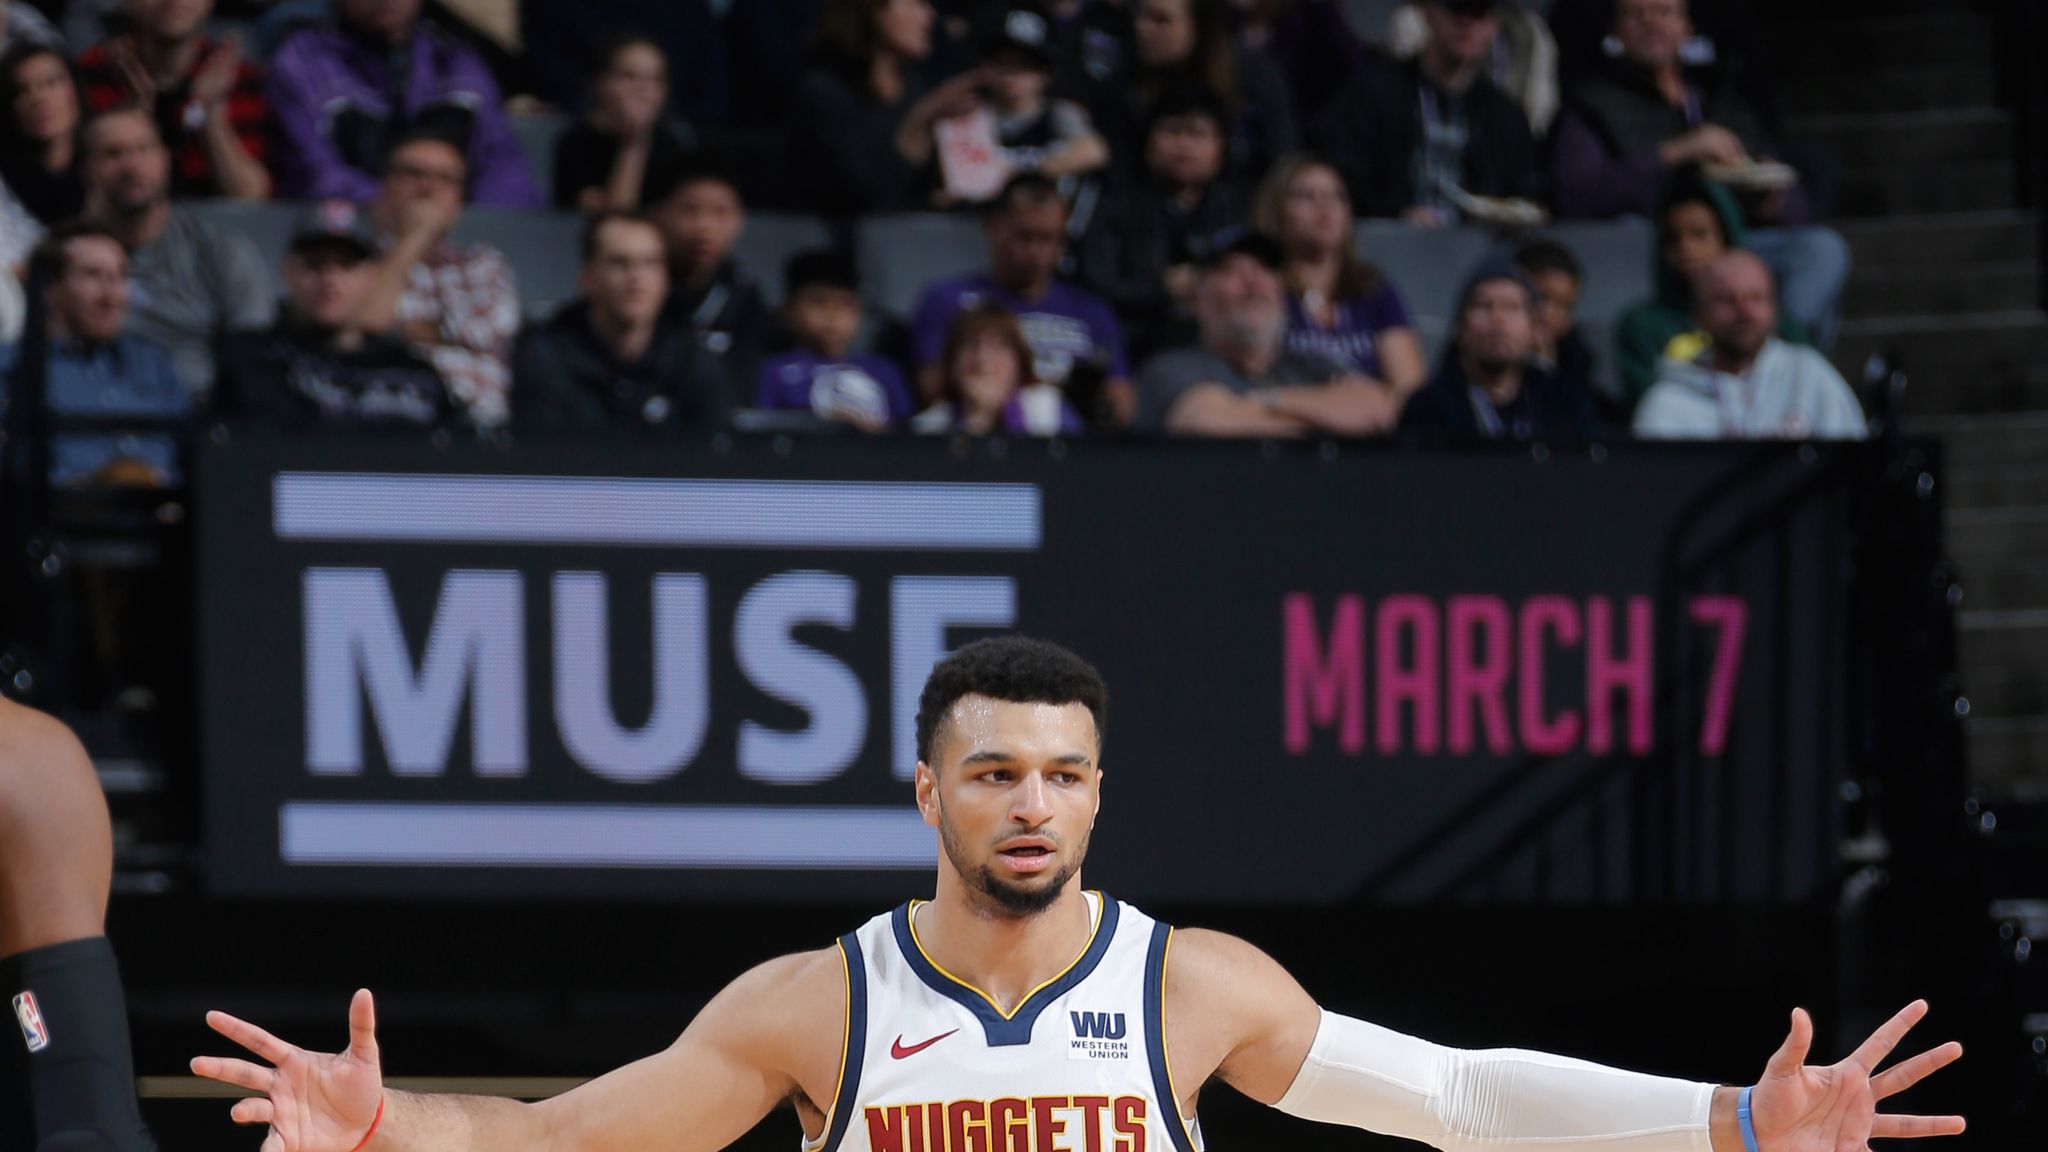 Canada's Jamal Murray becoming more than an offensive threat for